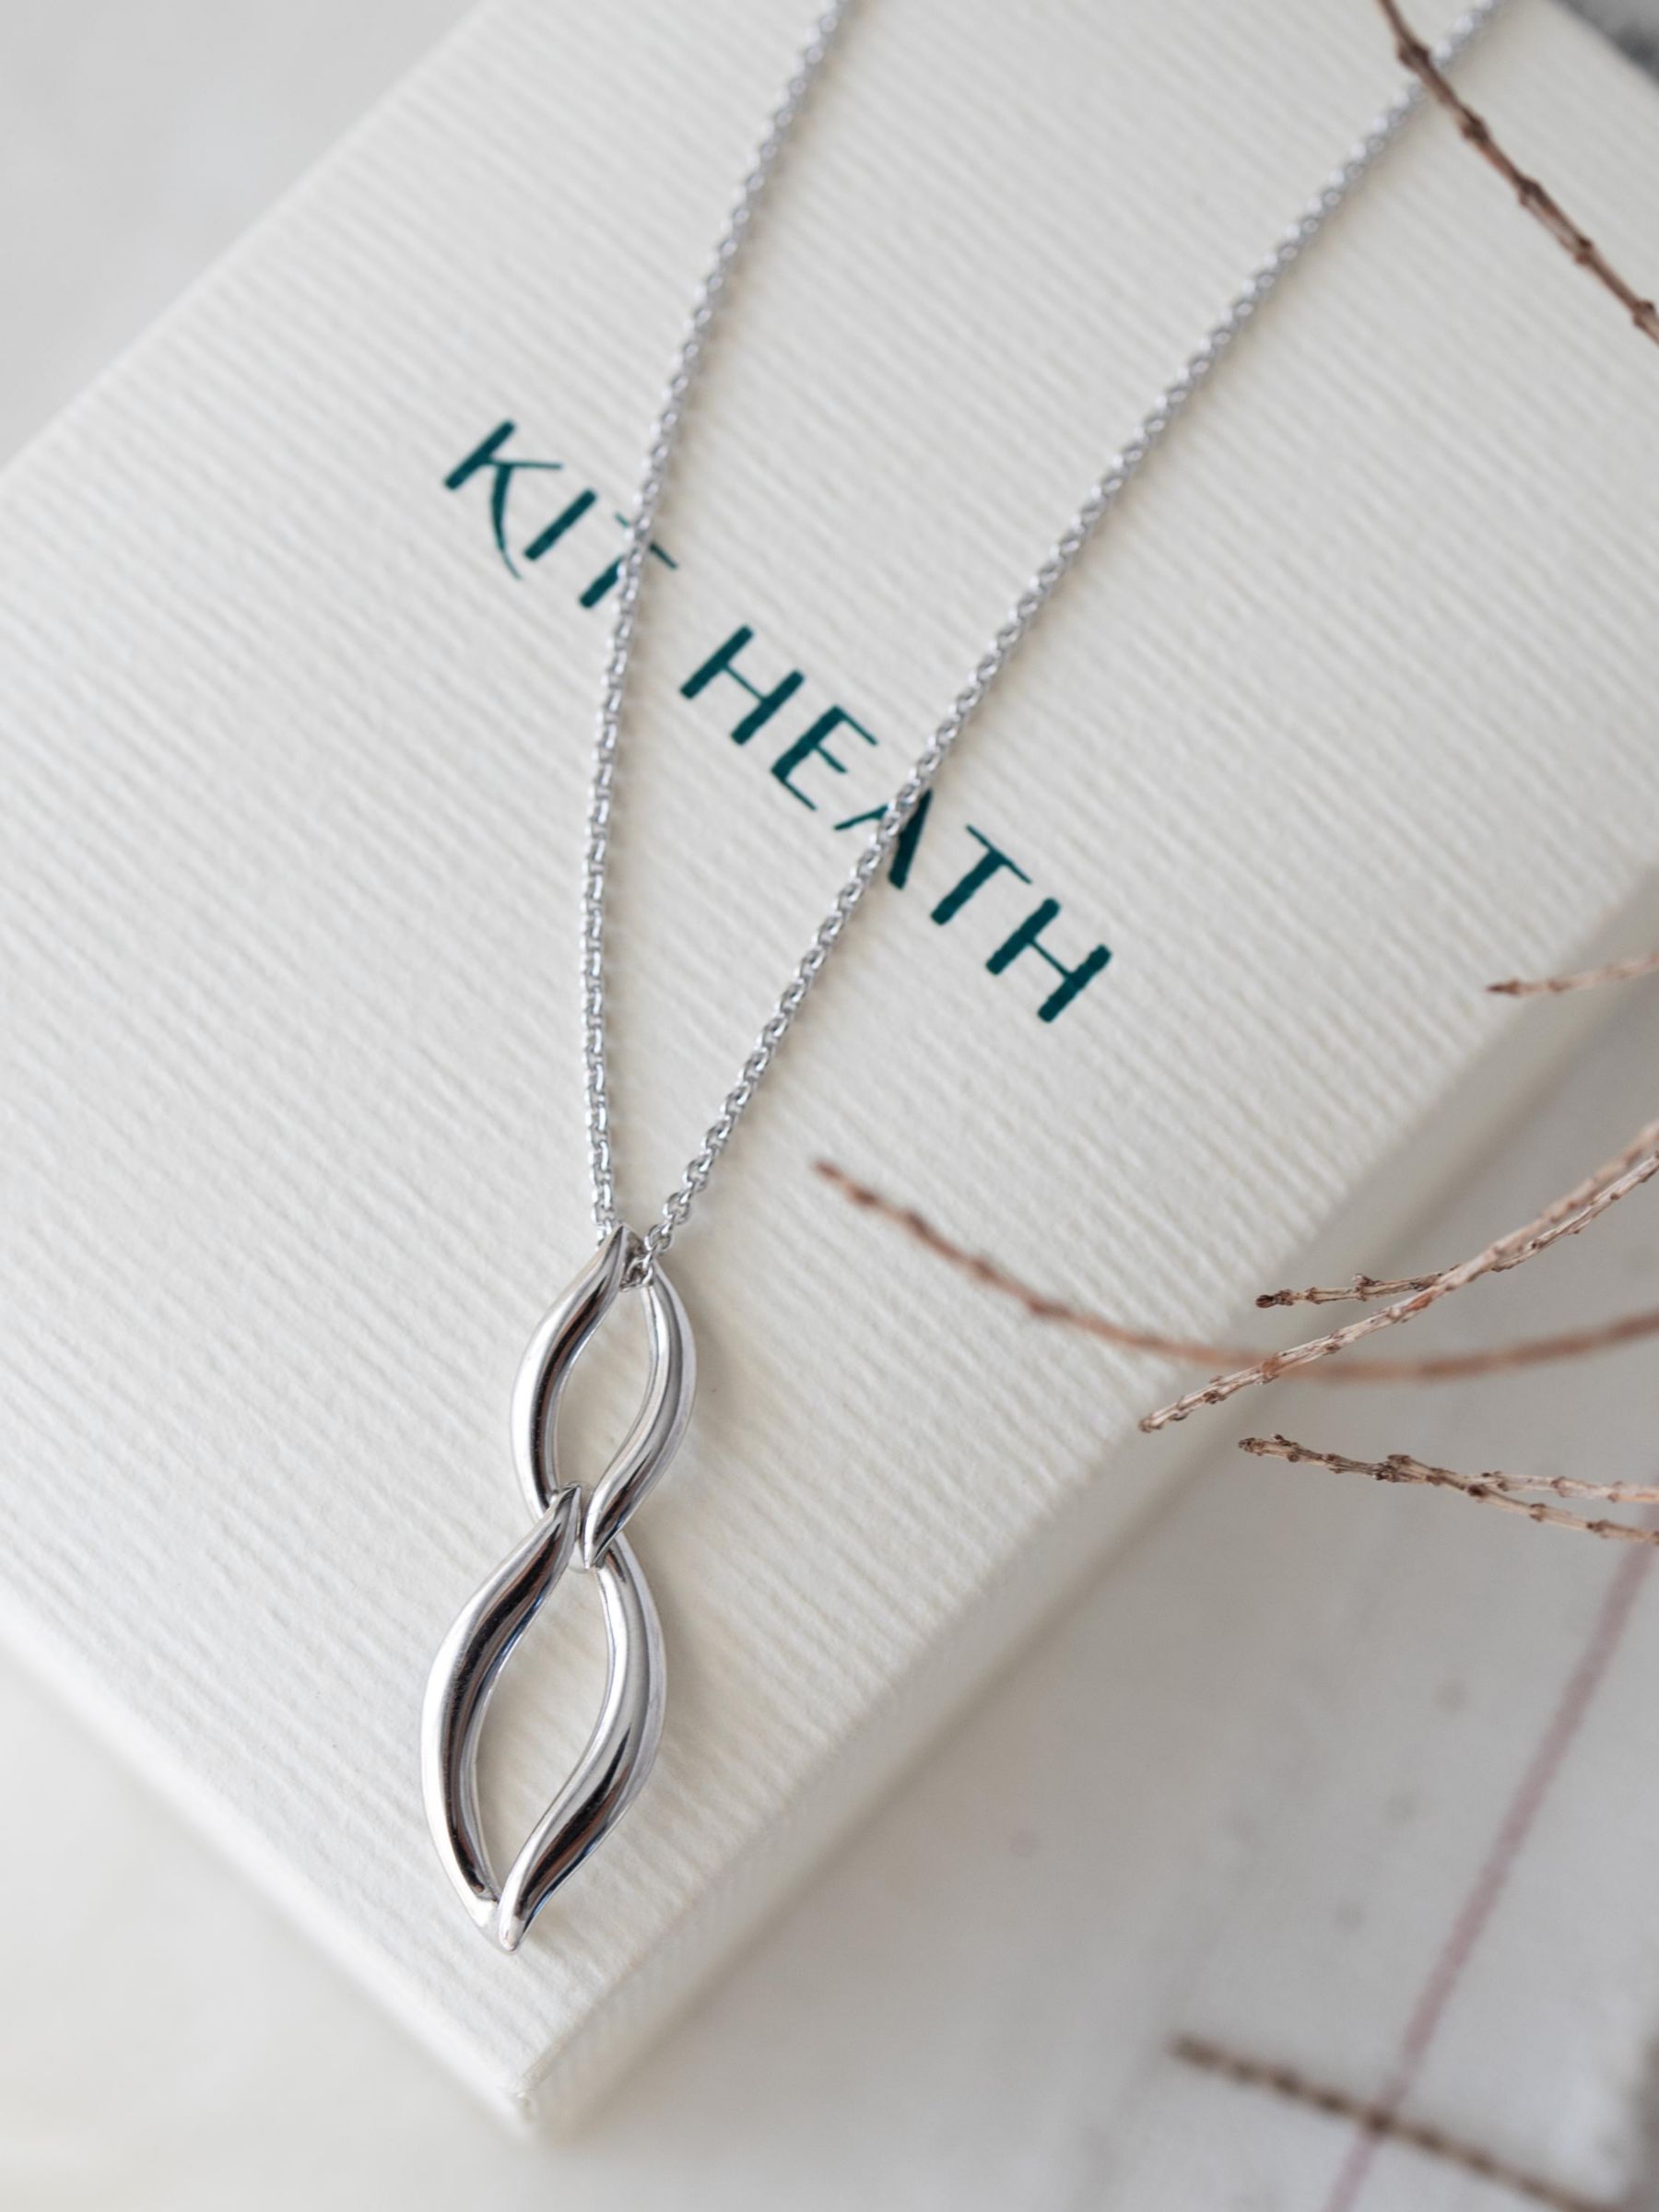 Buy Kit Heath Entwine Twine Duo Link Pendant Necklace, Silver Online at johnlewis.com